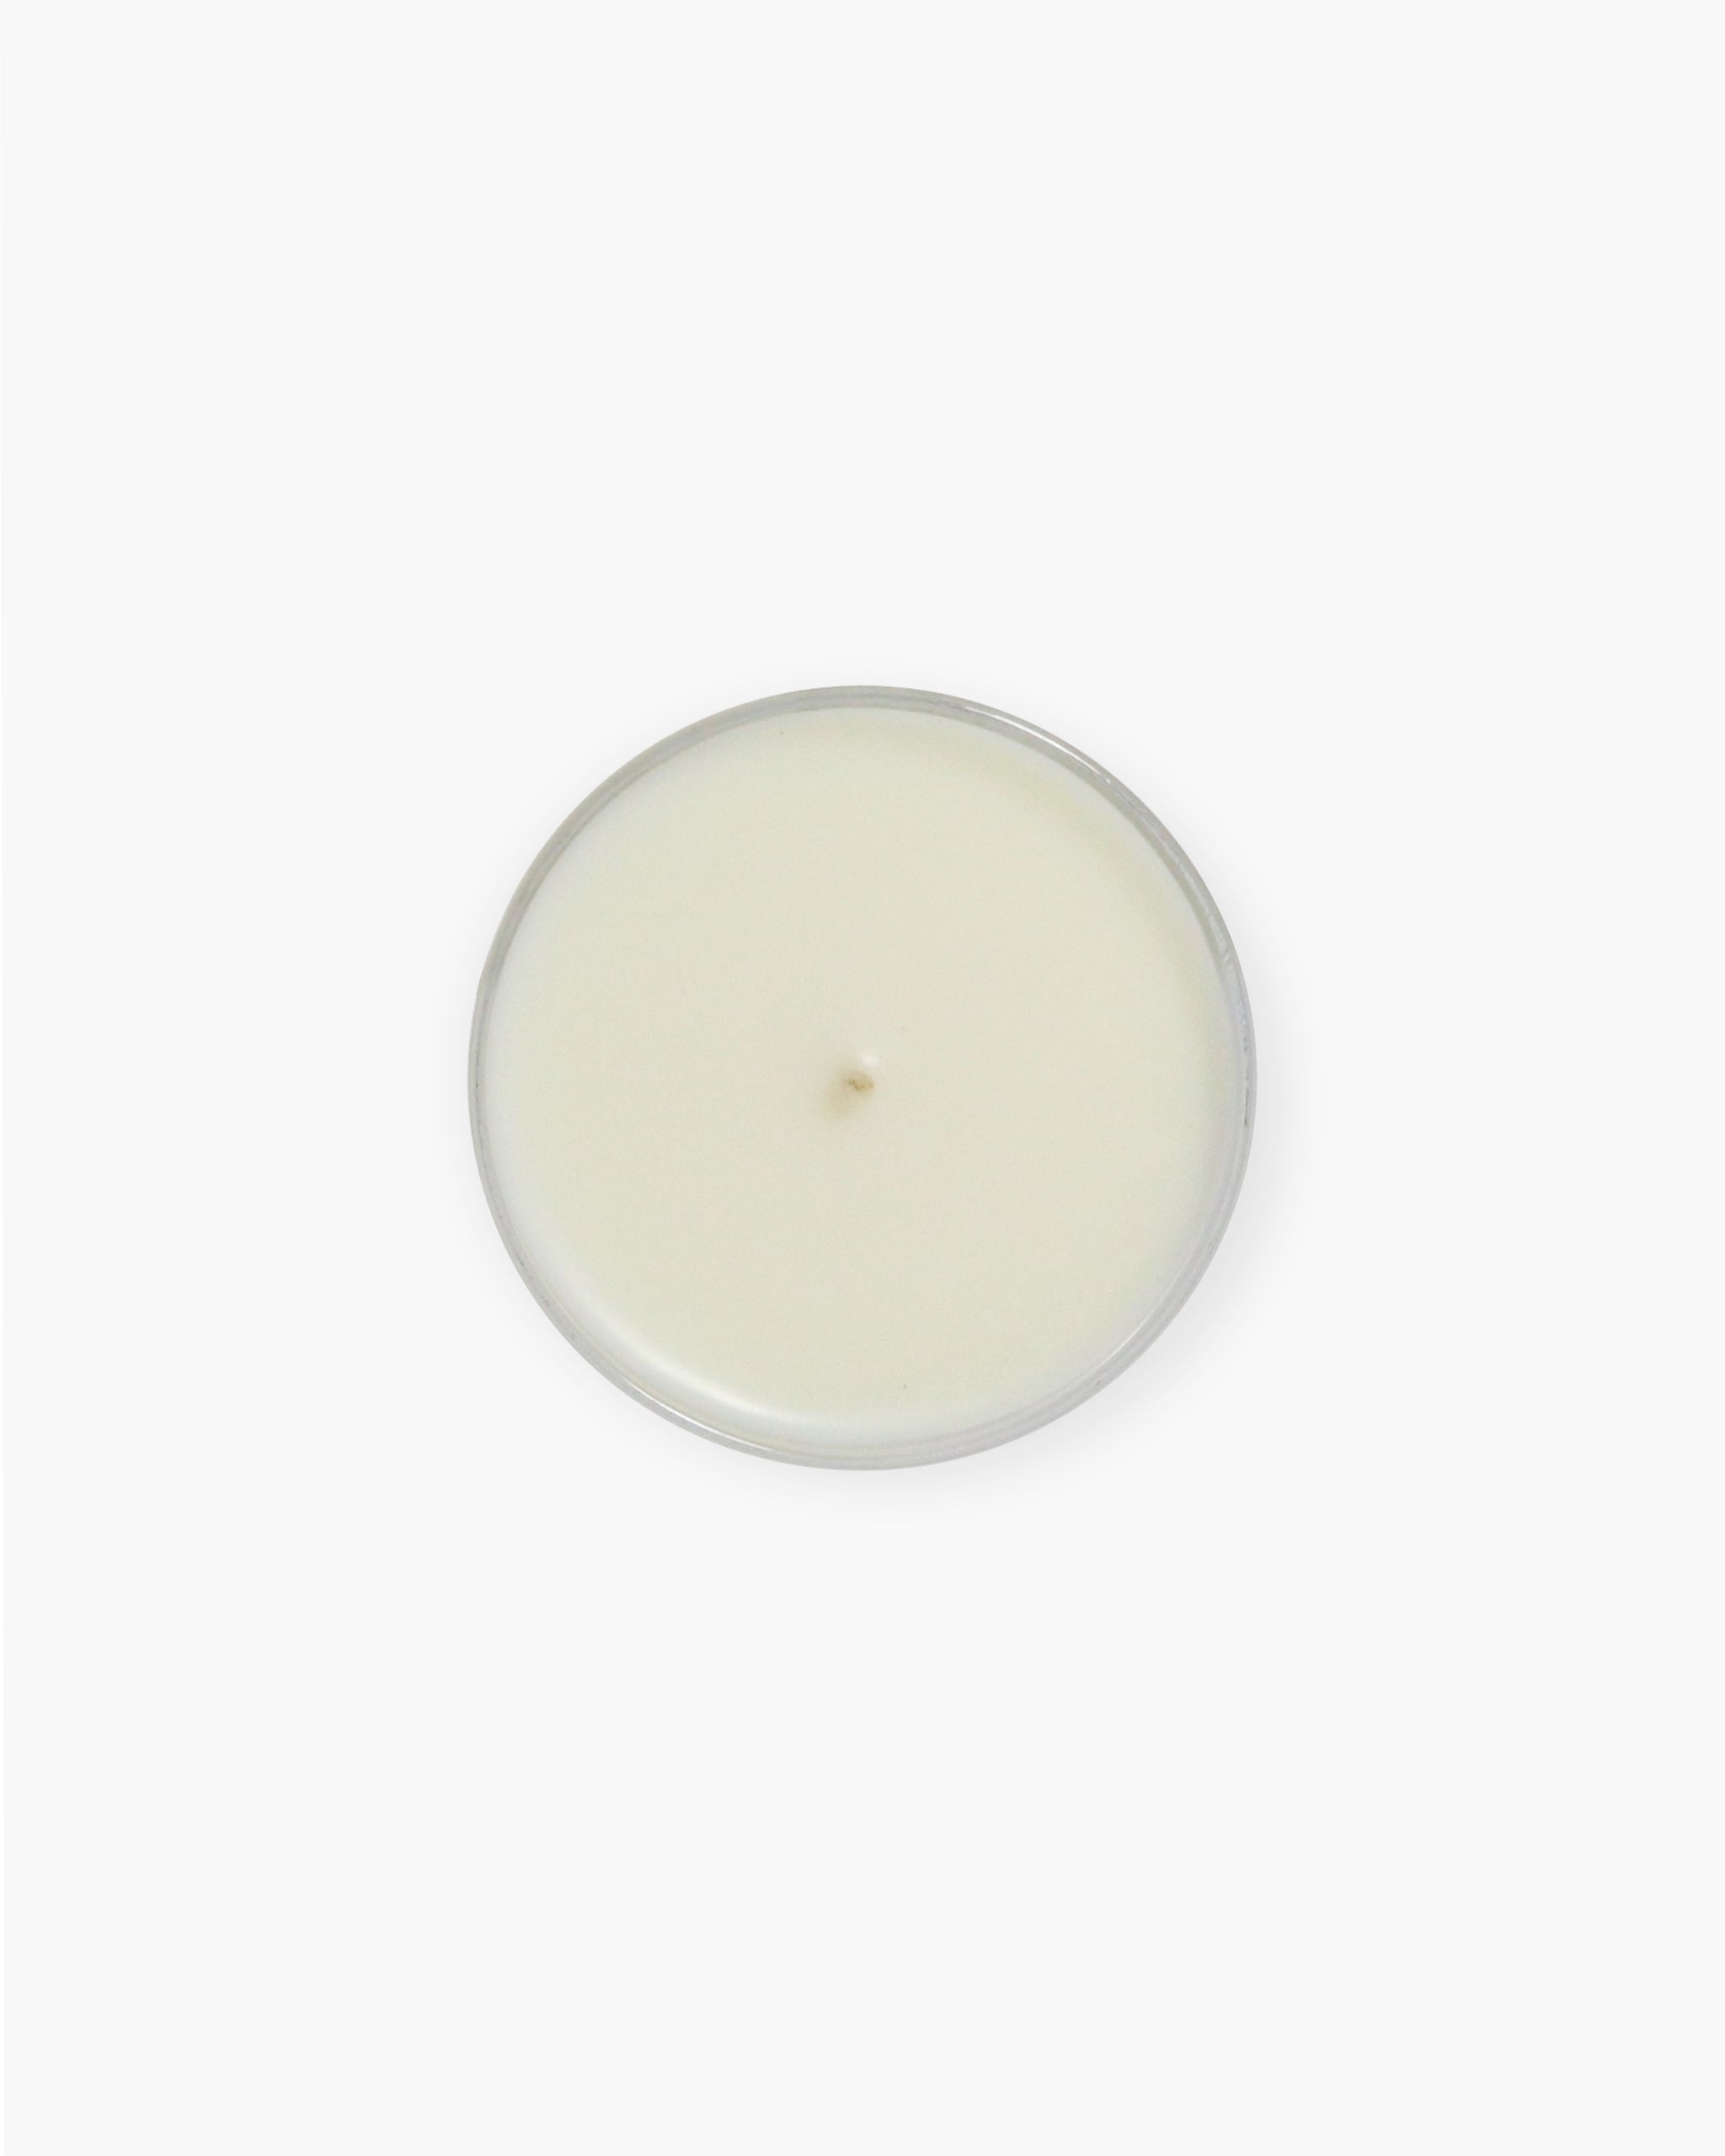 Accessories - Your House Smells Candle - 8oz.